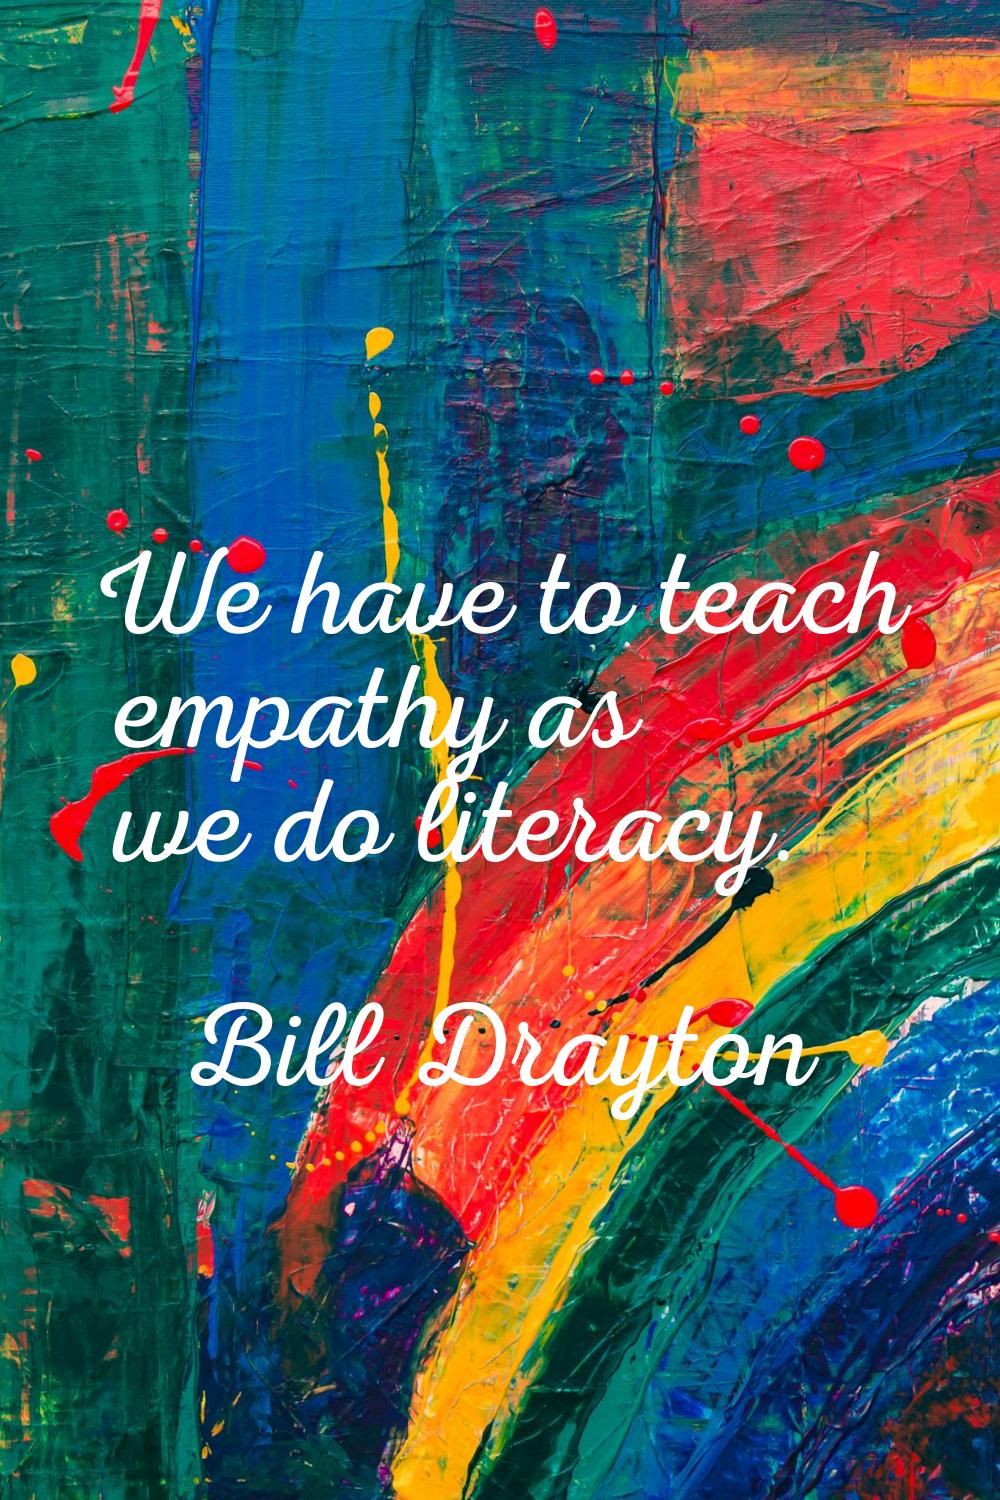 We have to teach empathy as we do literacy.